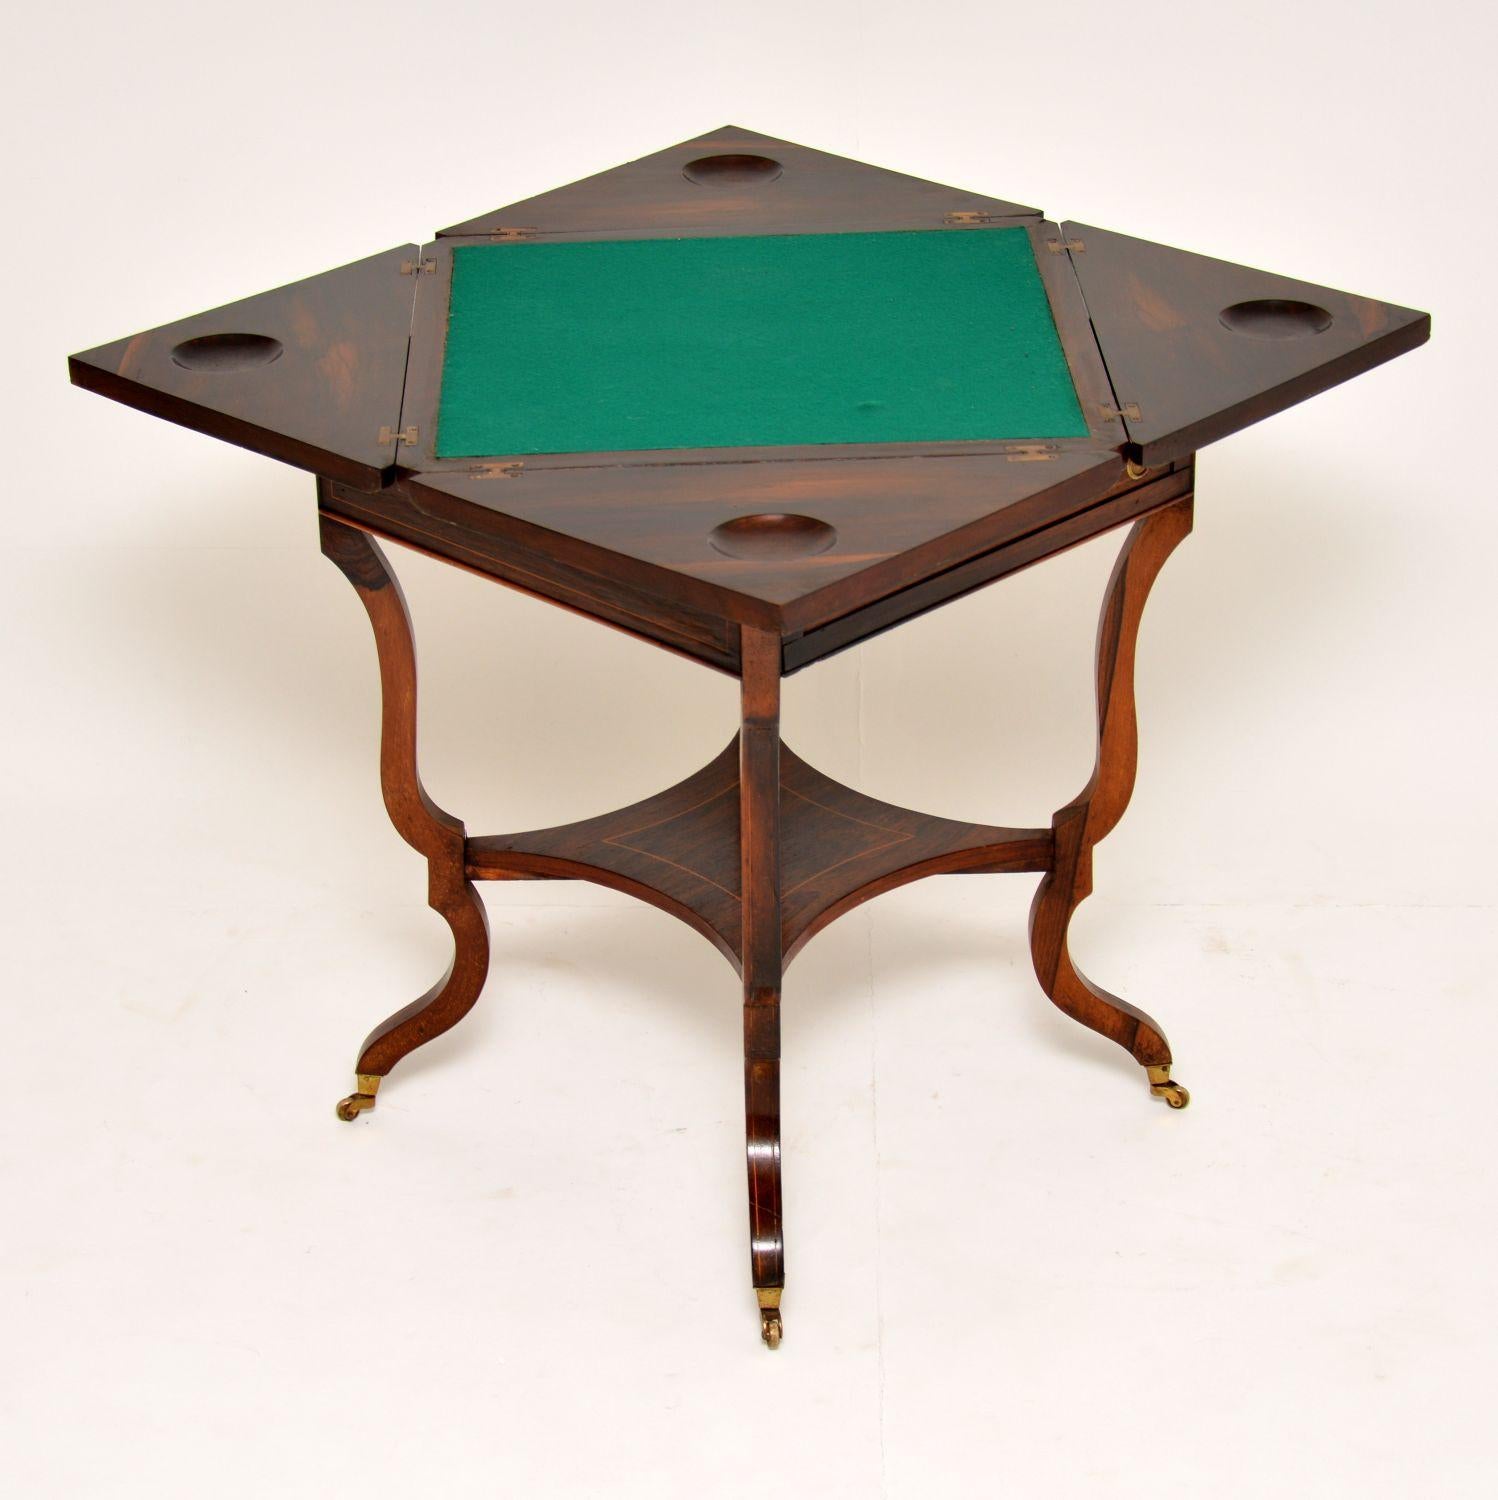 Nice quality antique Victorian ‘envelope card table’ in wood with some exquisite classical inlays on the top section. This card table is in good condition, having just been polished and I would date it to circa 1880s period. It’s a very clever